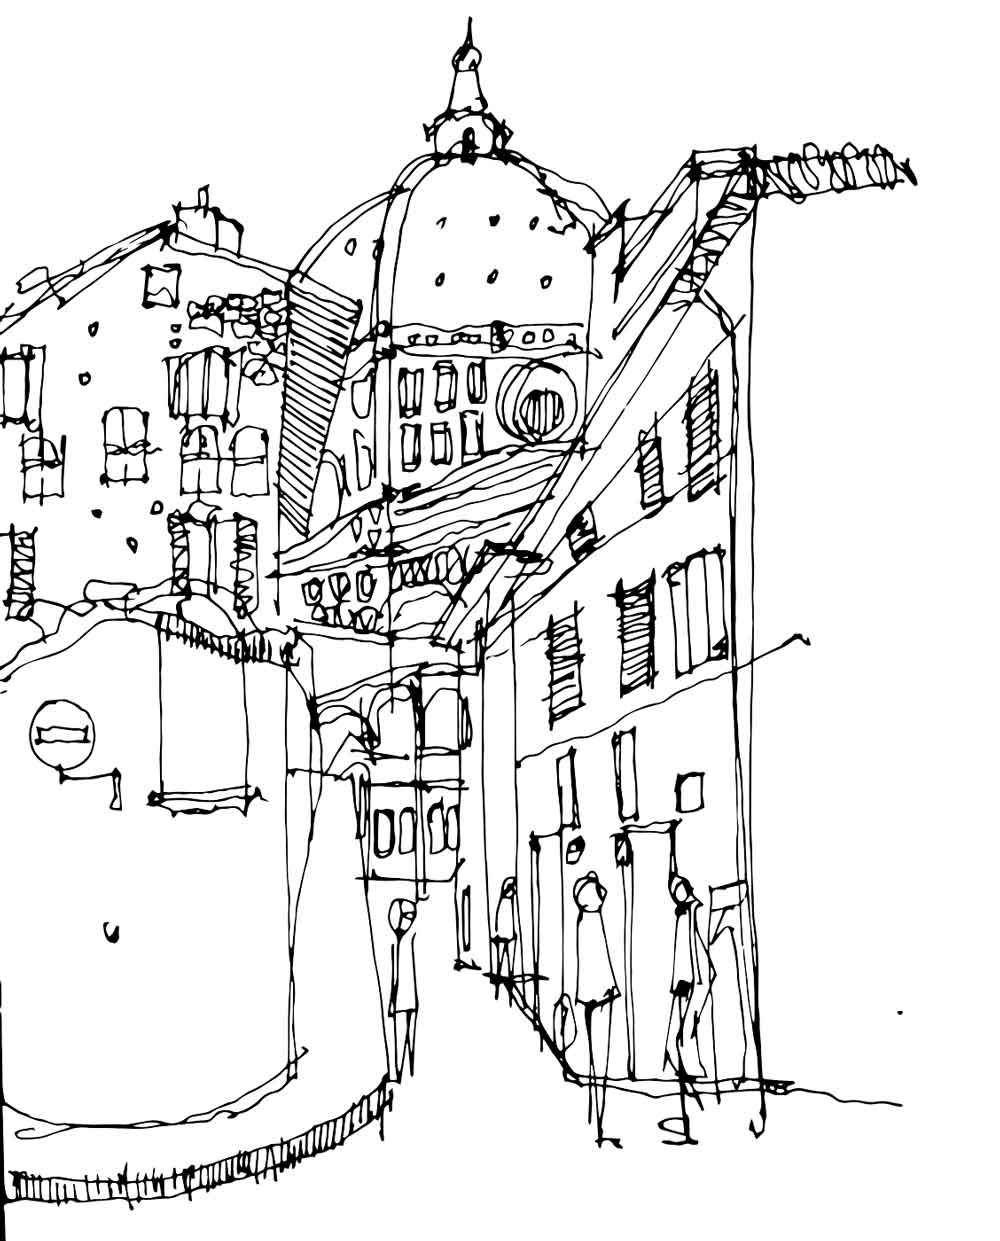 A sketch of a street in a city